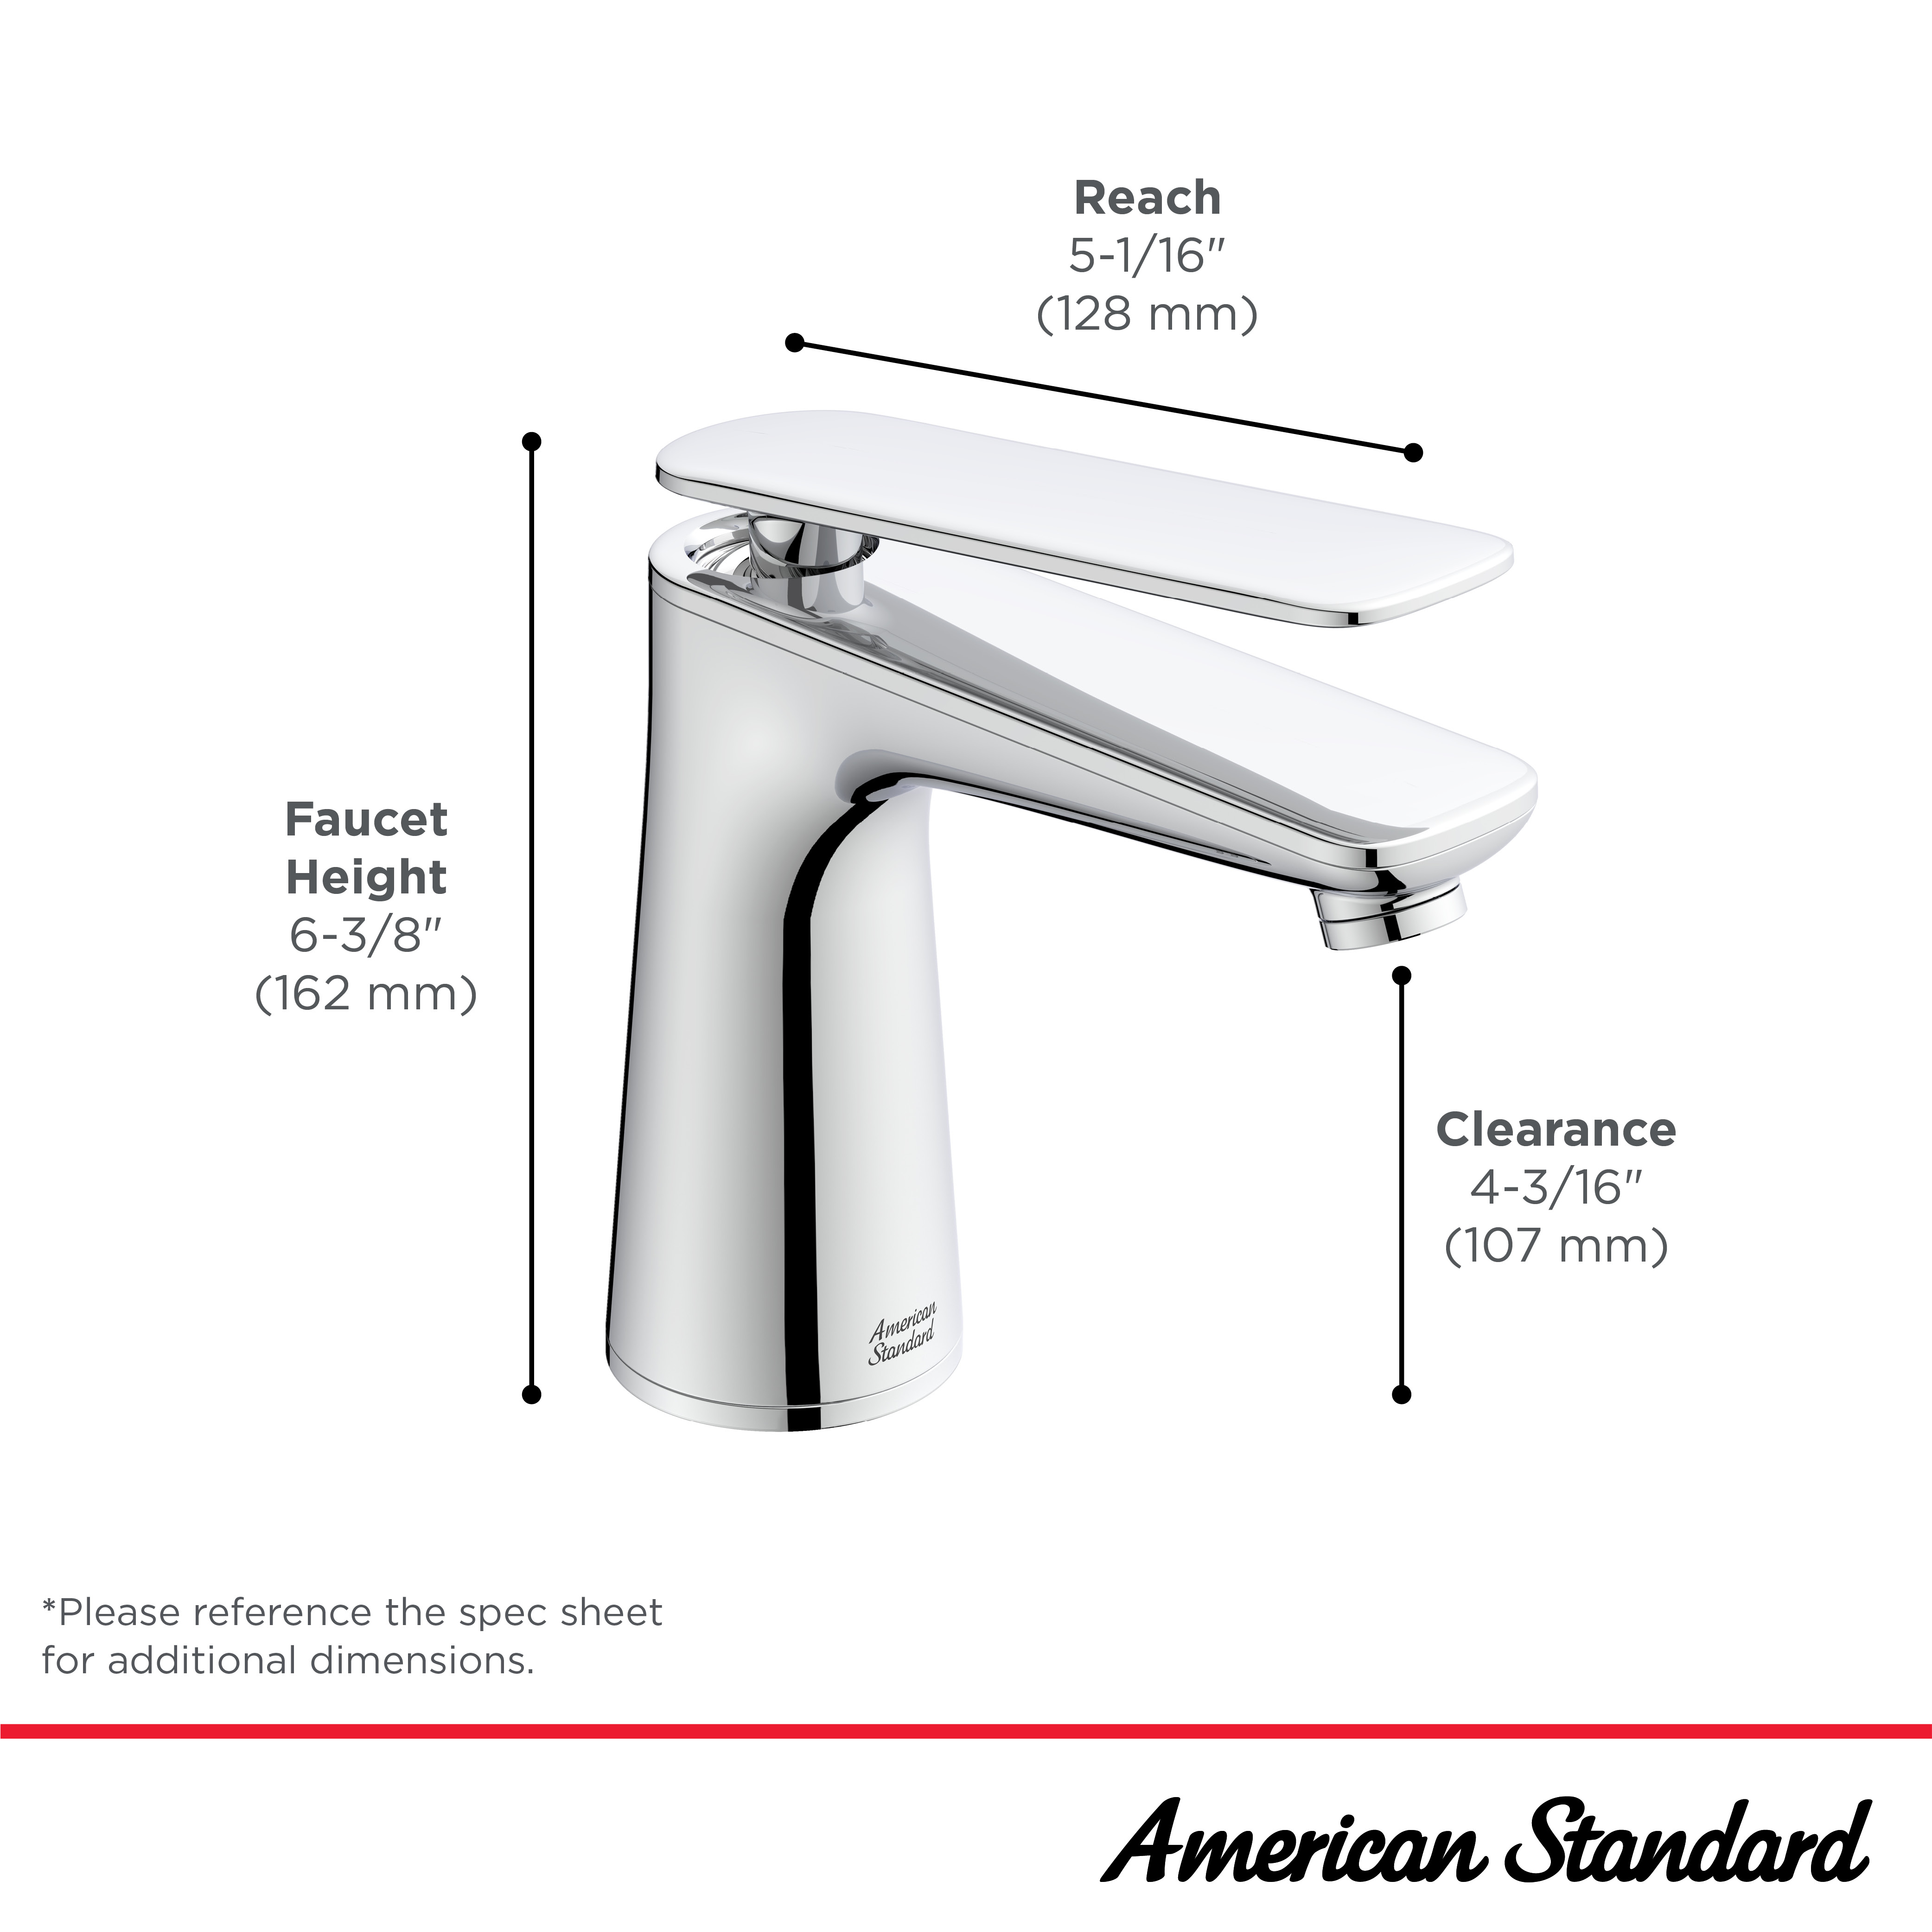 Aspirations™ Single-Handle Bathroom Faucet 1.2 gpm/4.5 L/min With Lever Handle Less Drain